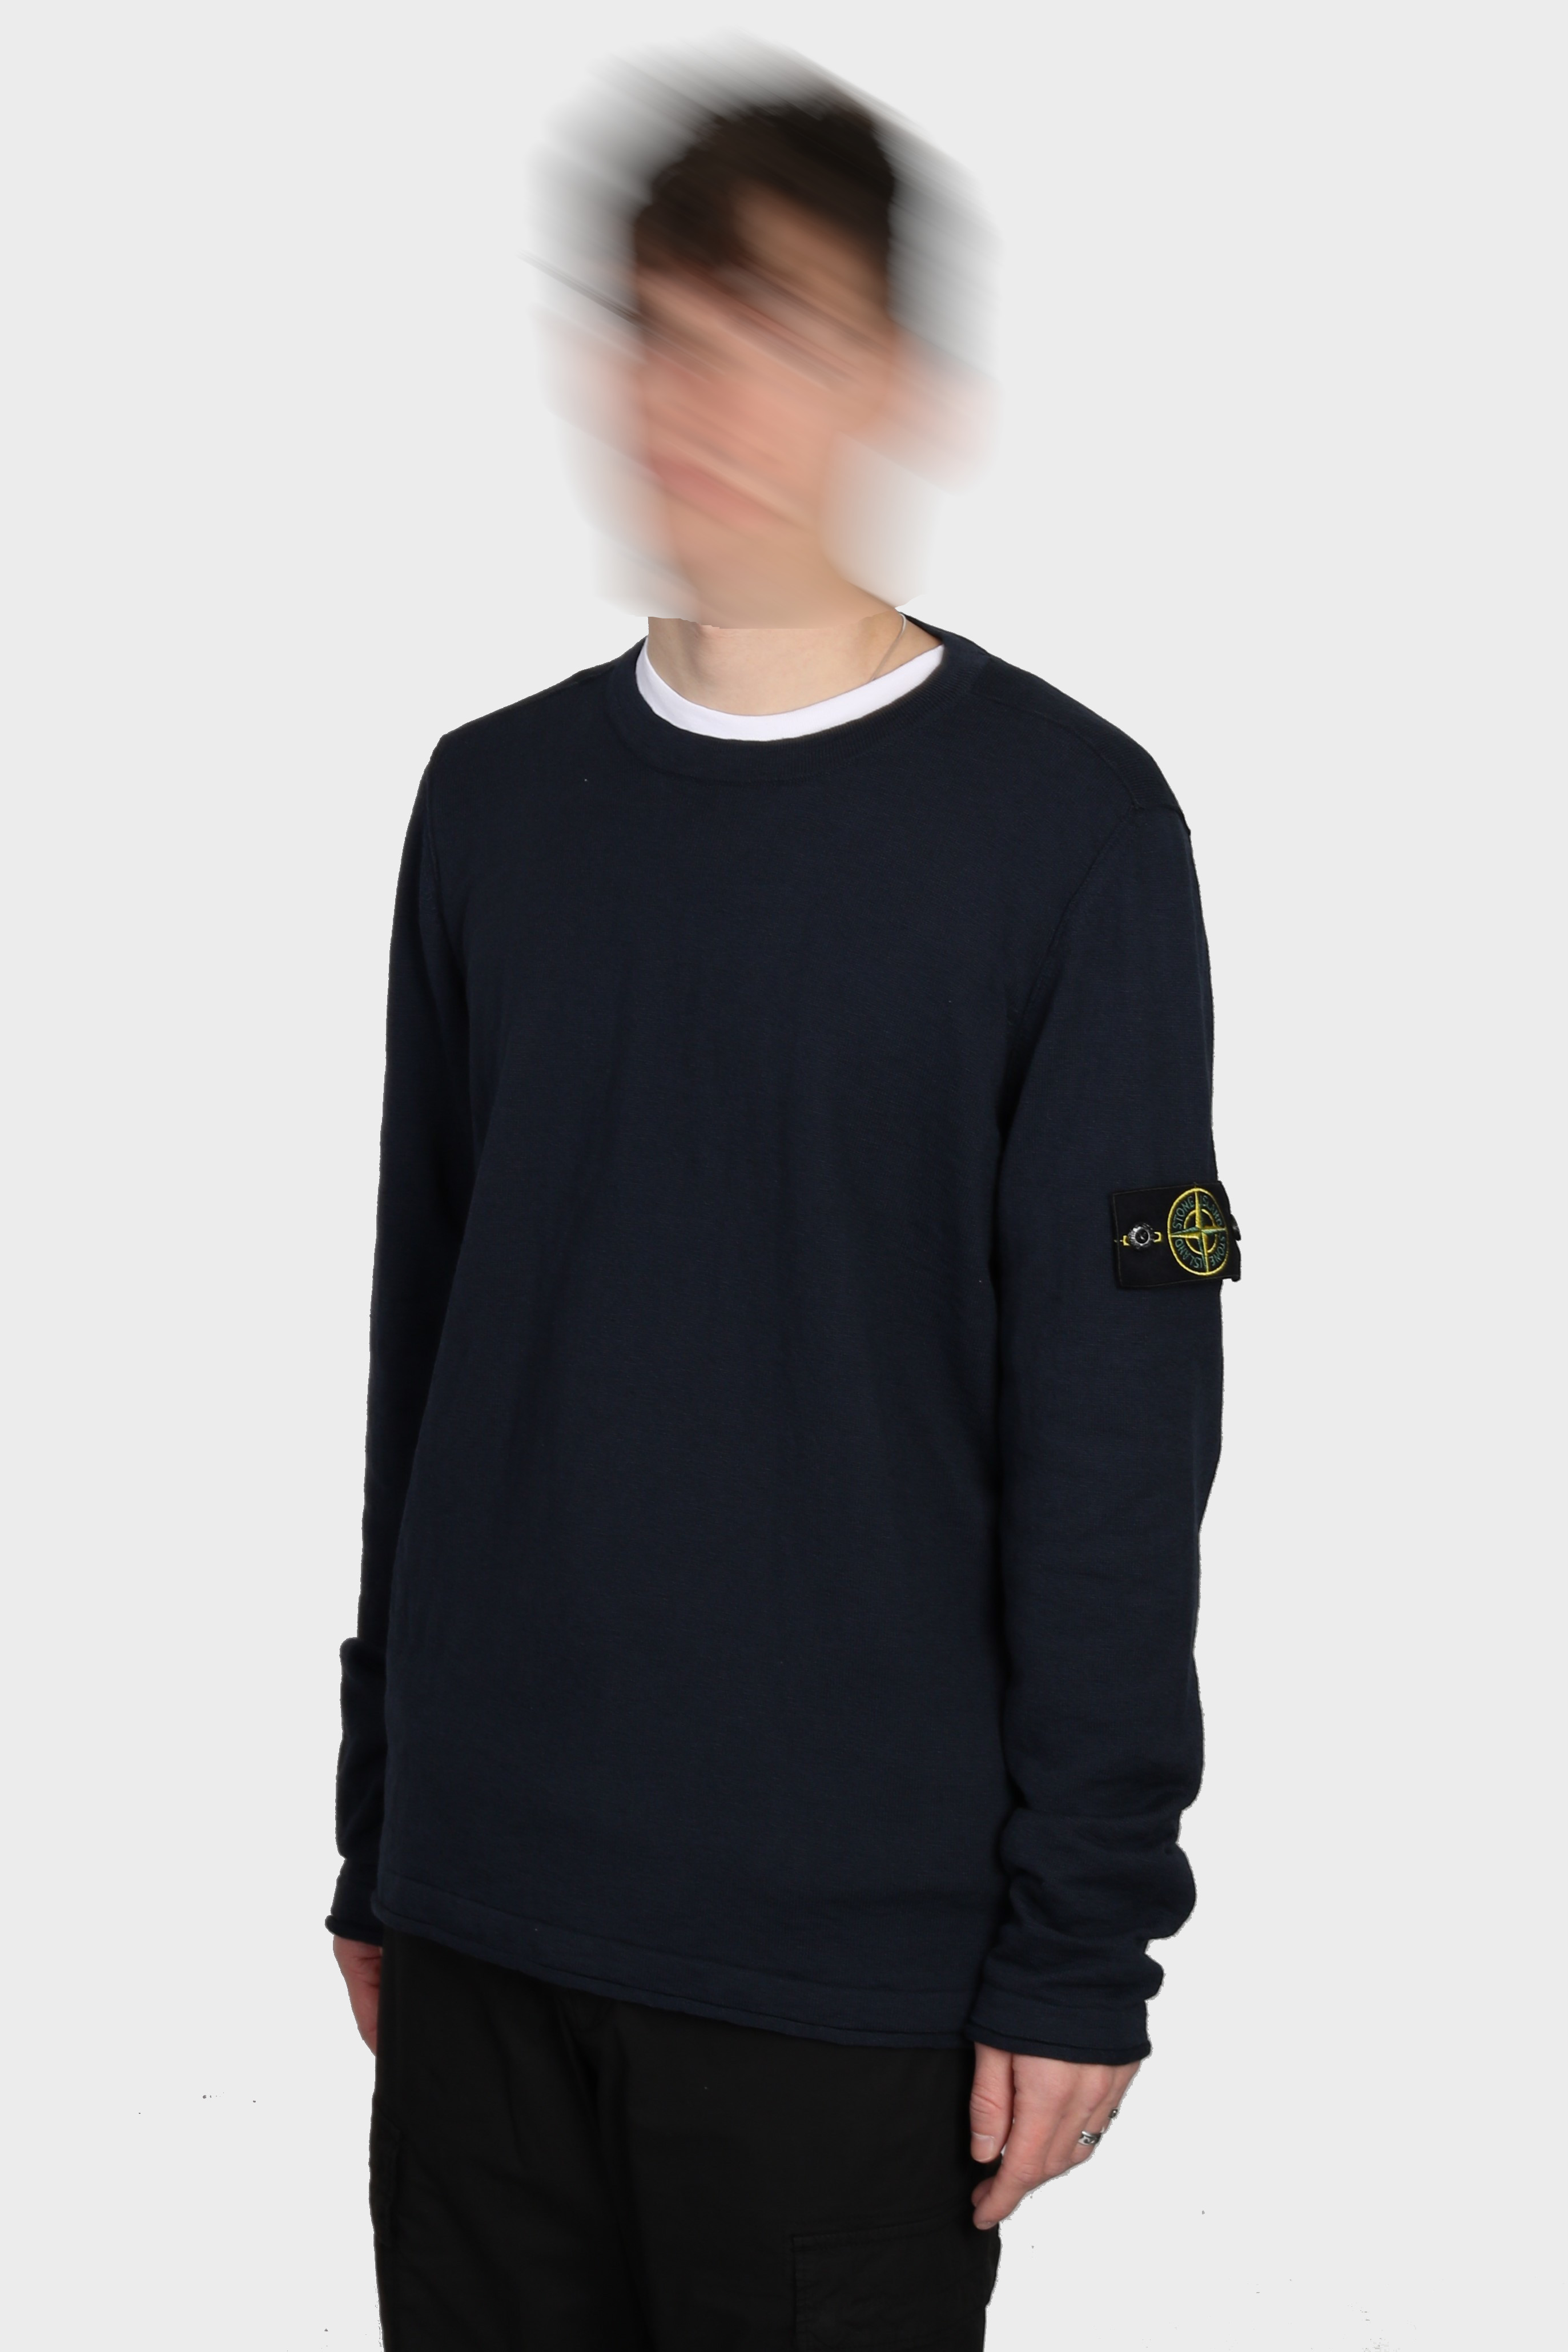 STONE ISLAND Summer Knit Pullover in Navy L